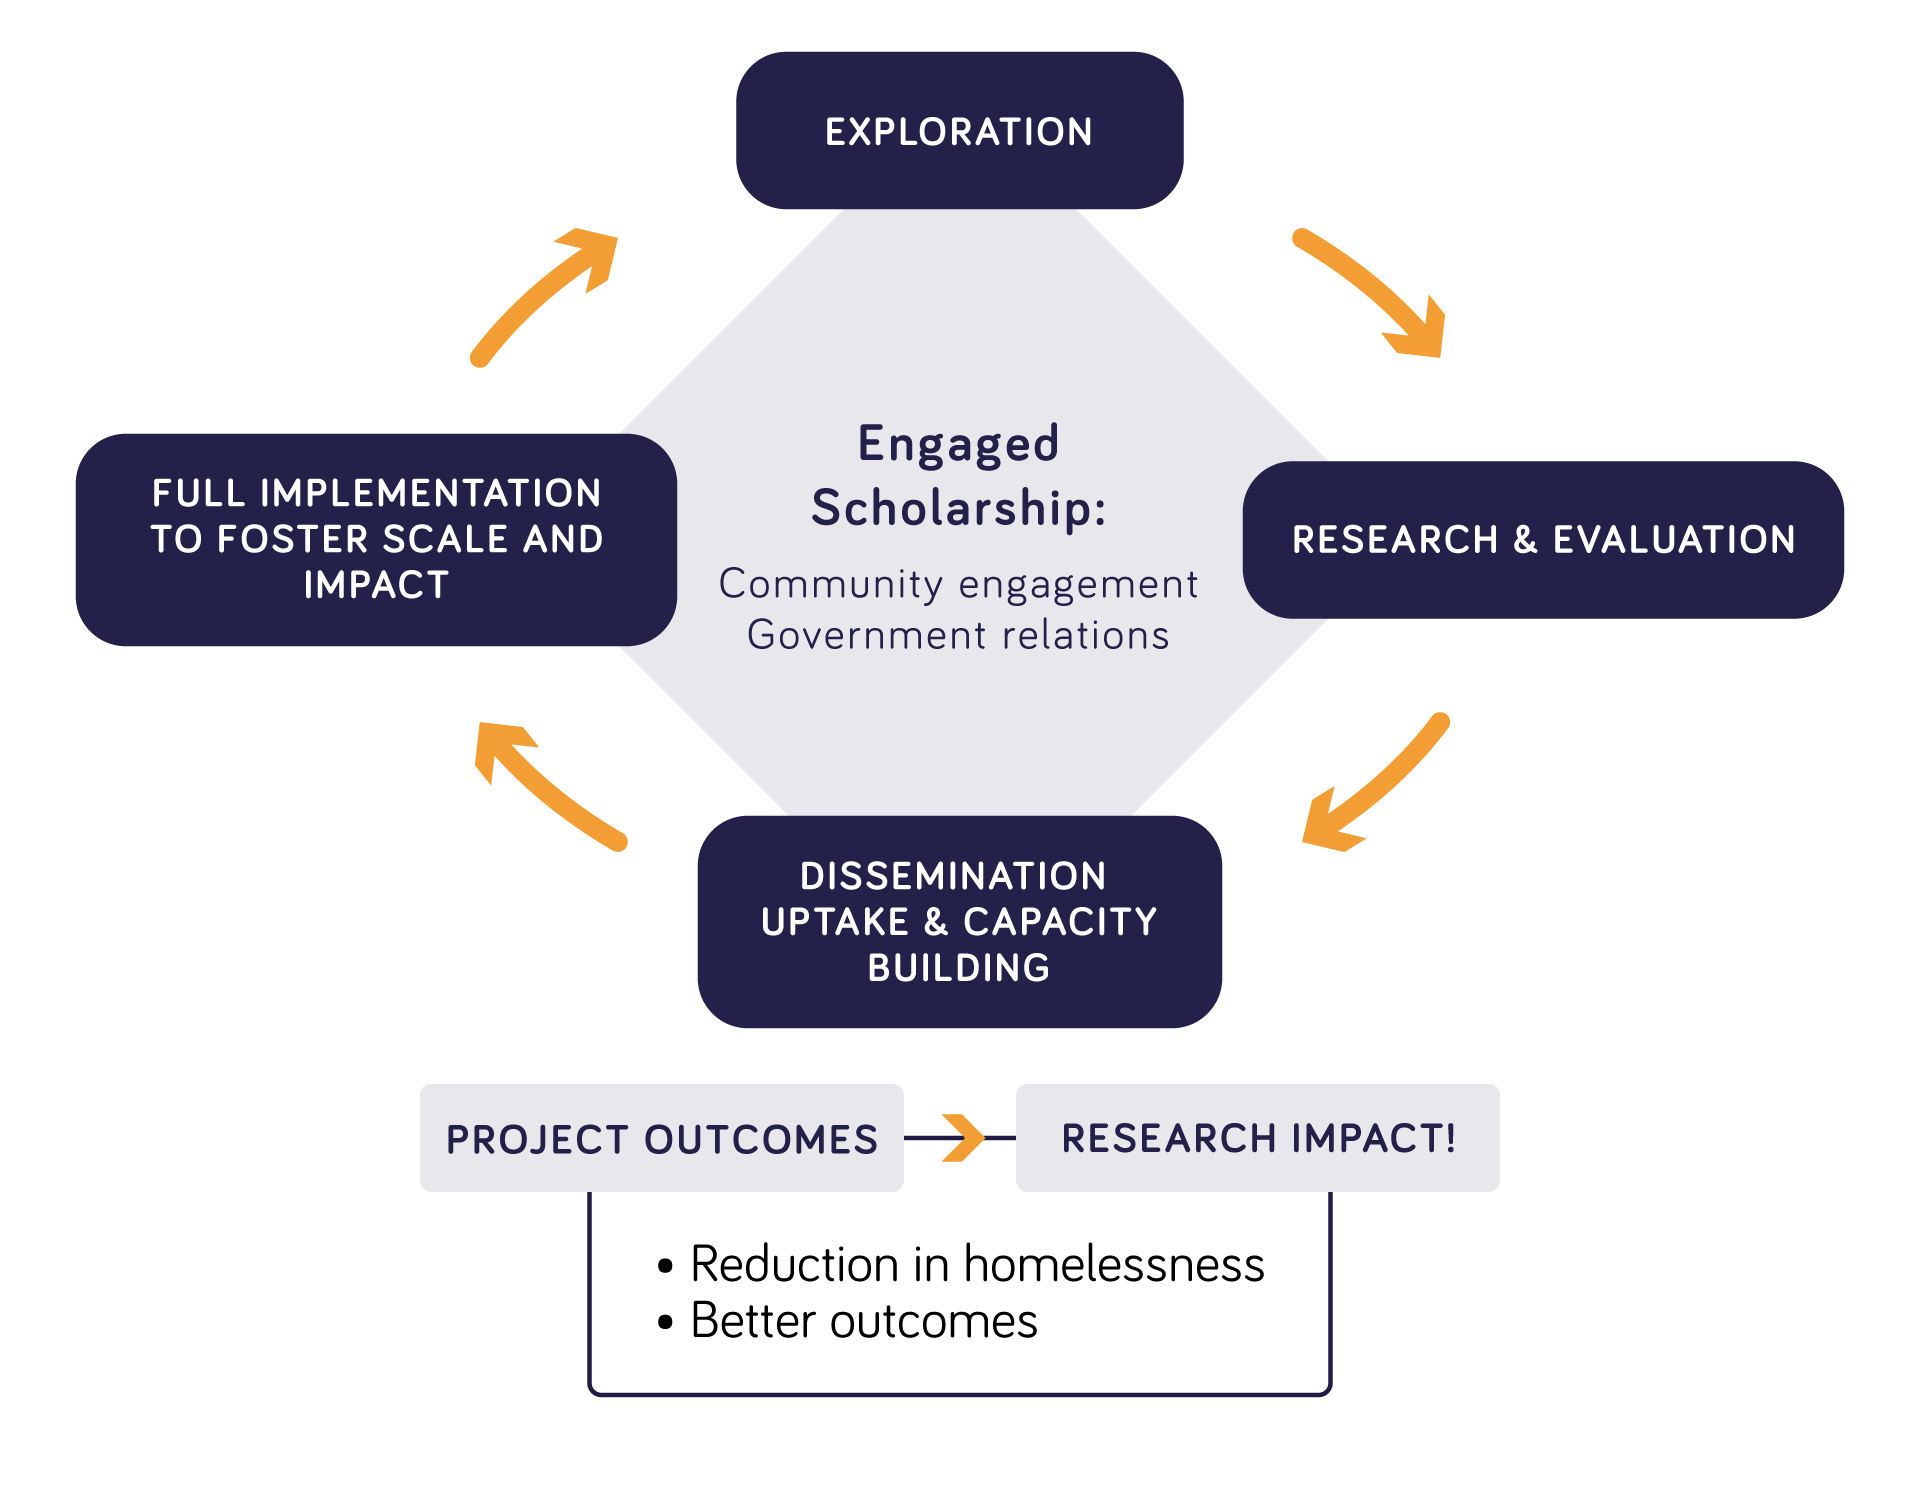 COH's Research to Impact Cycle